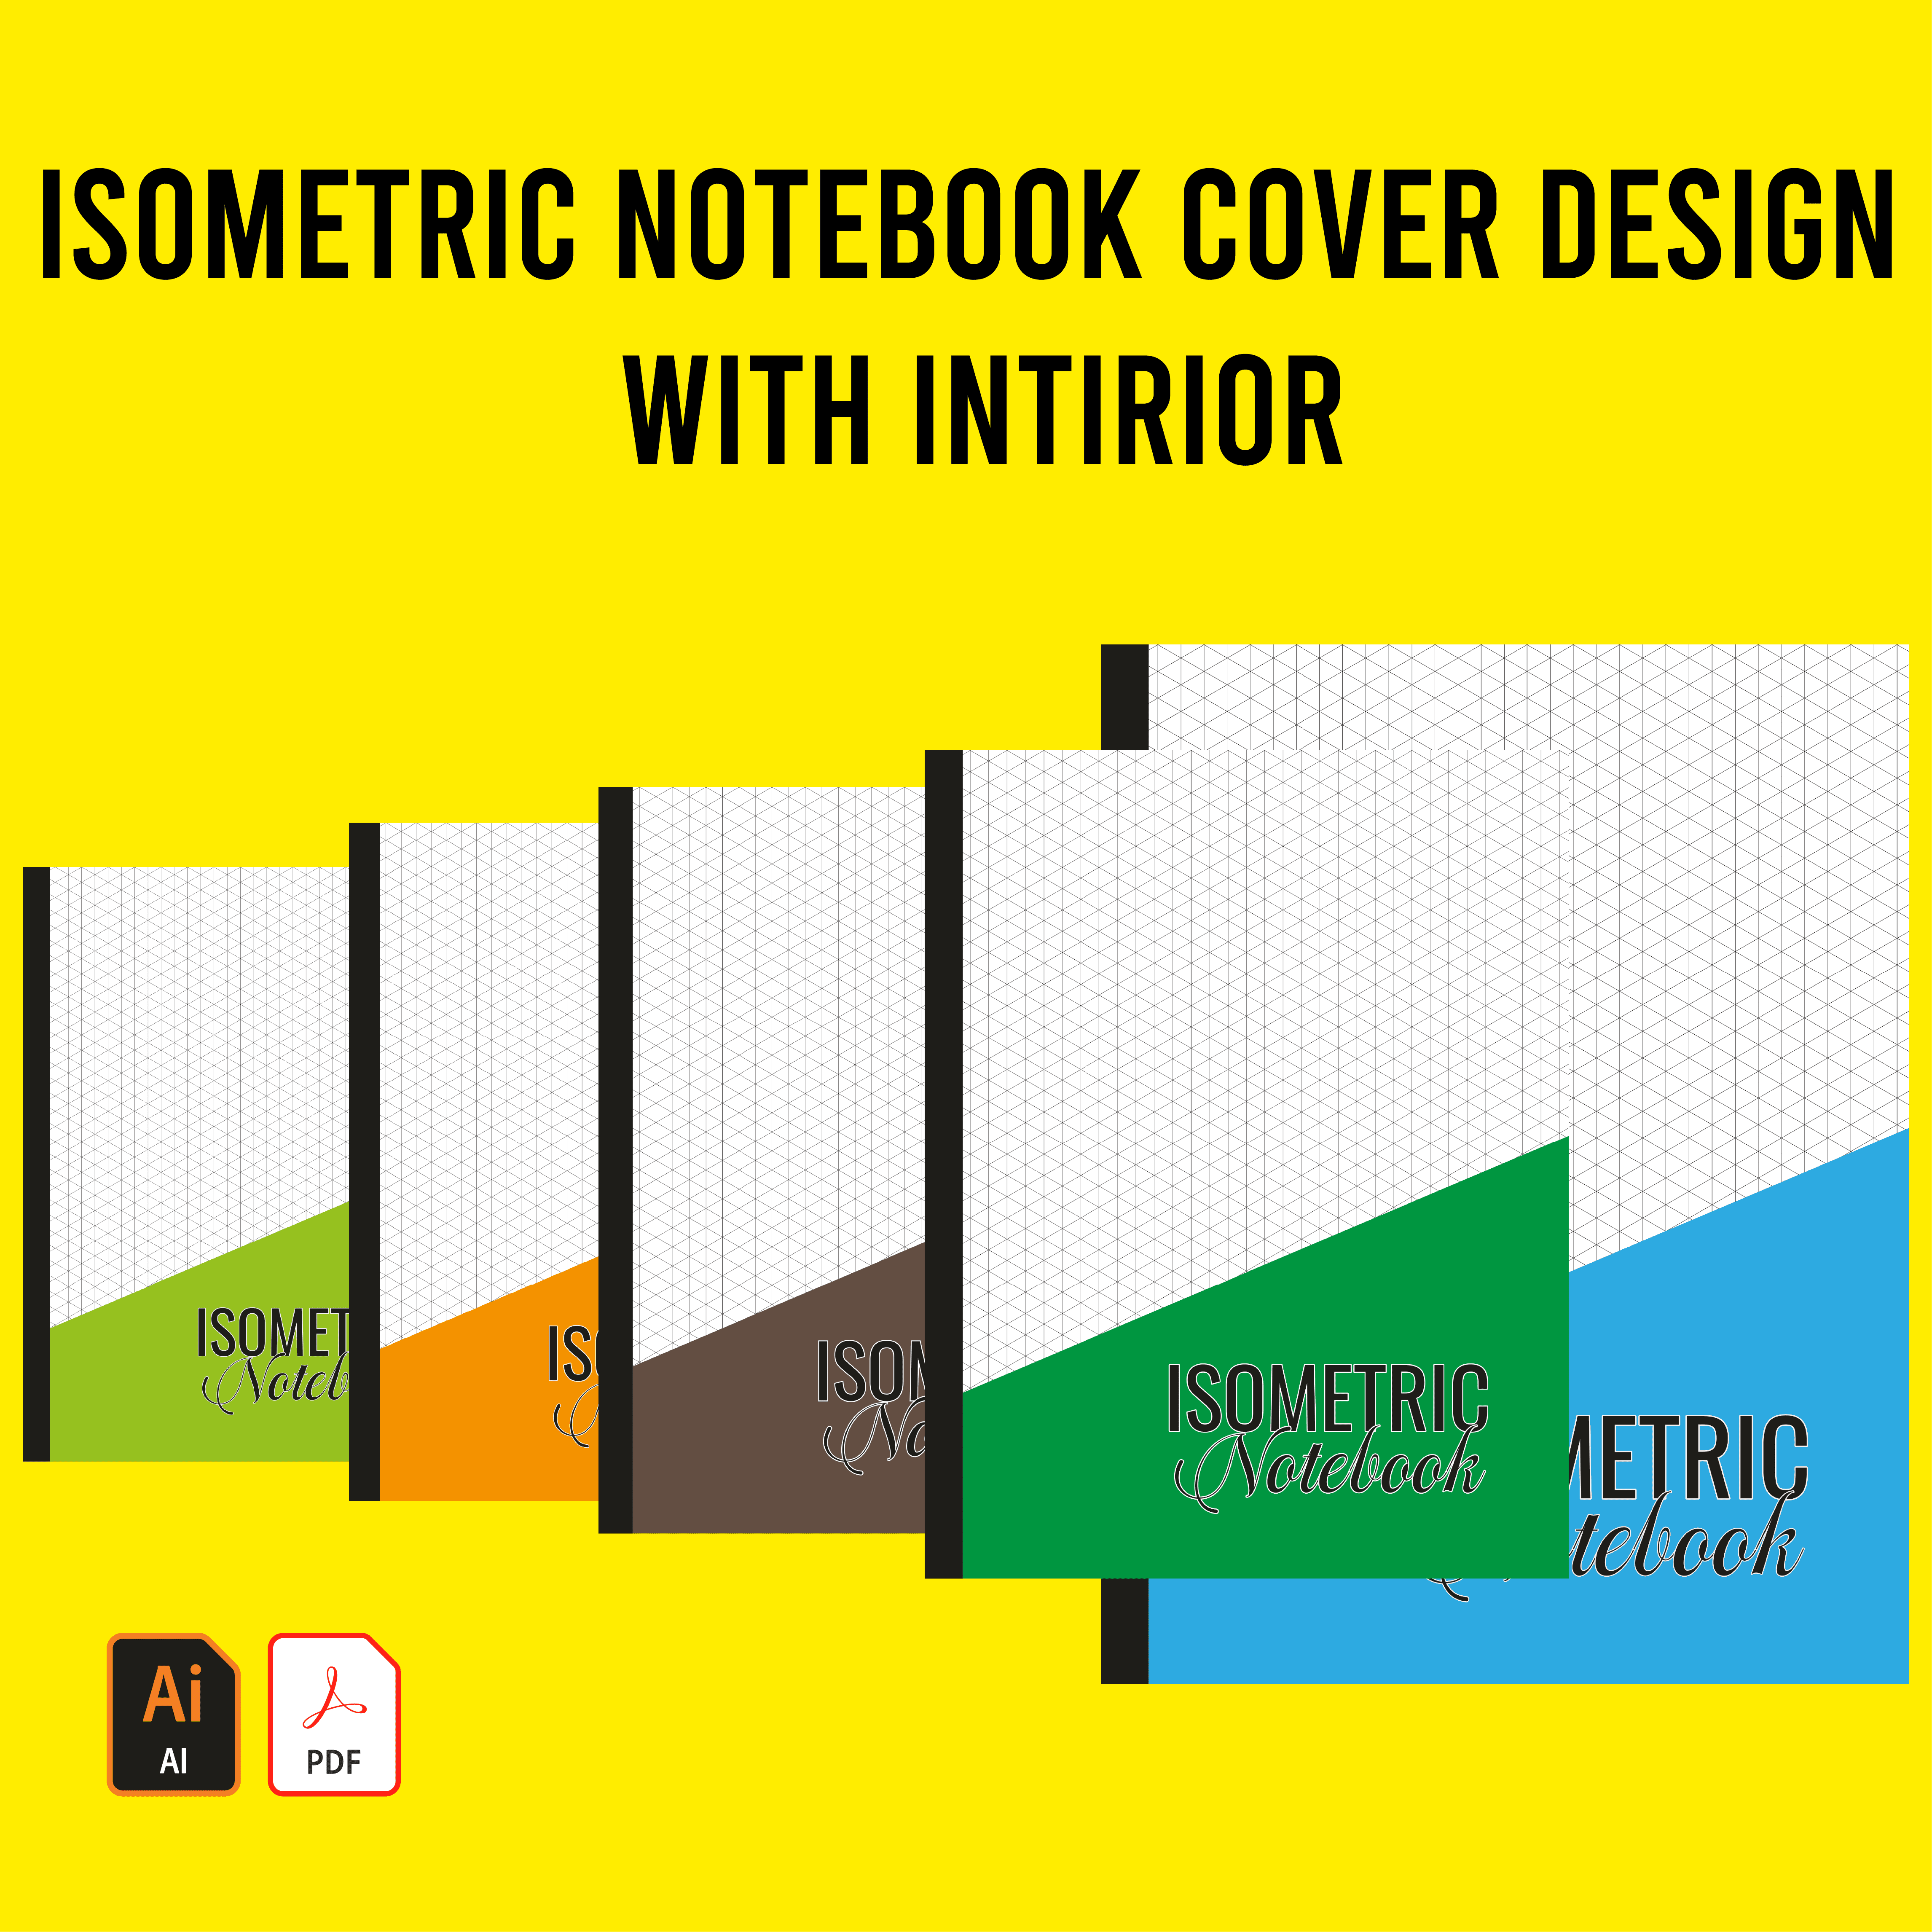 Isometric Notebook Cover Design With Interior cover image.